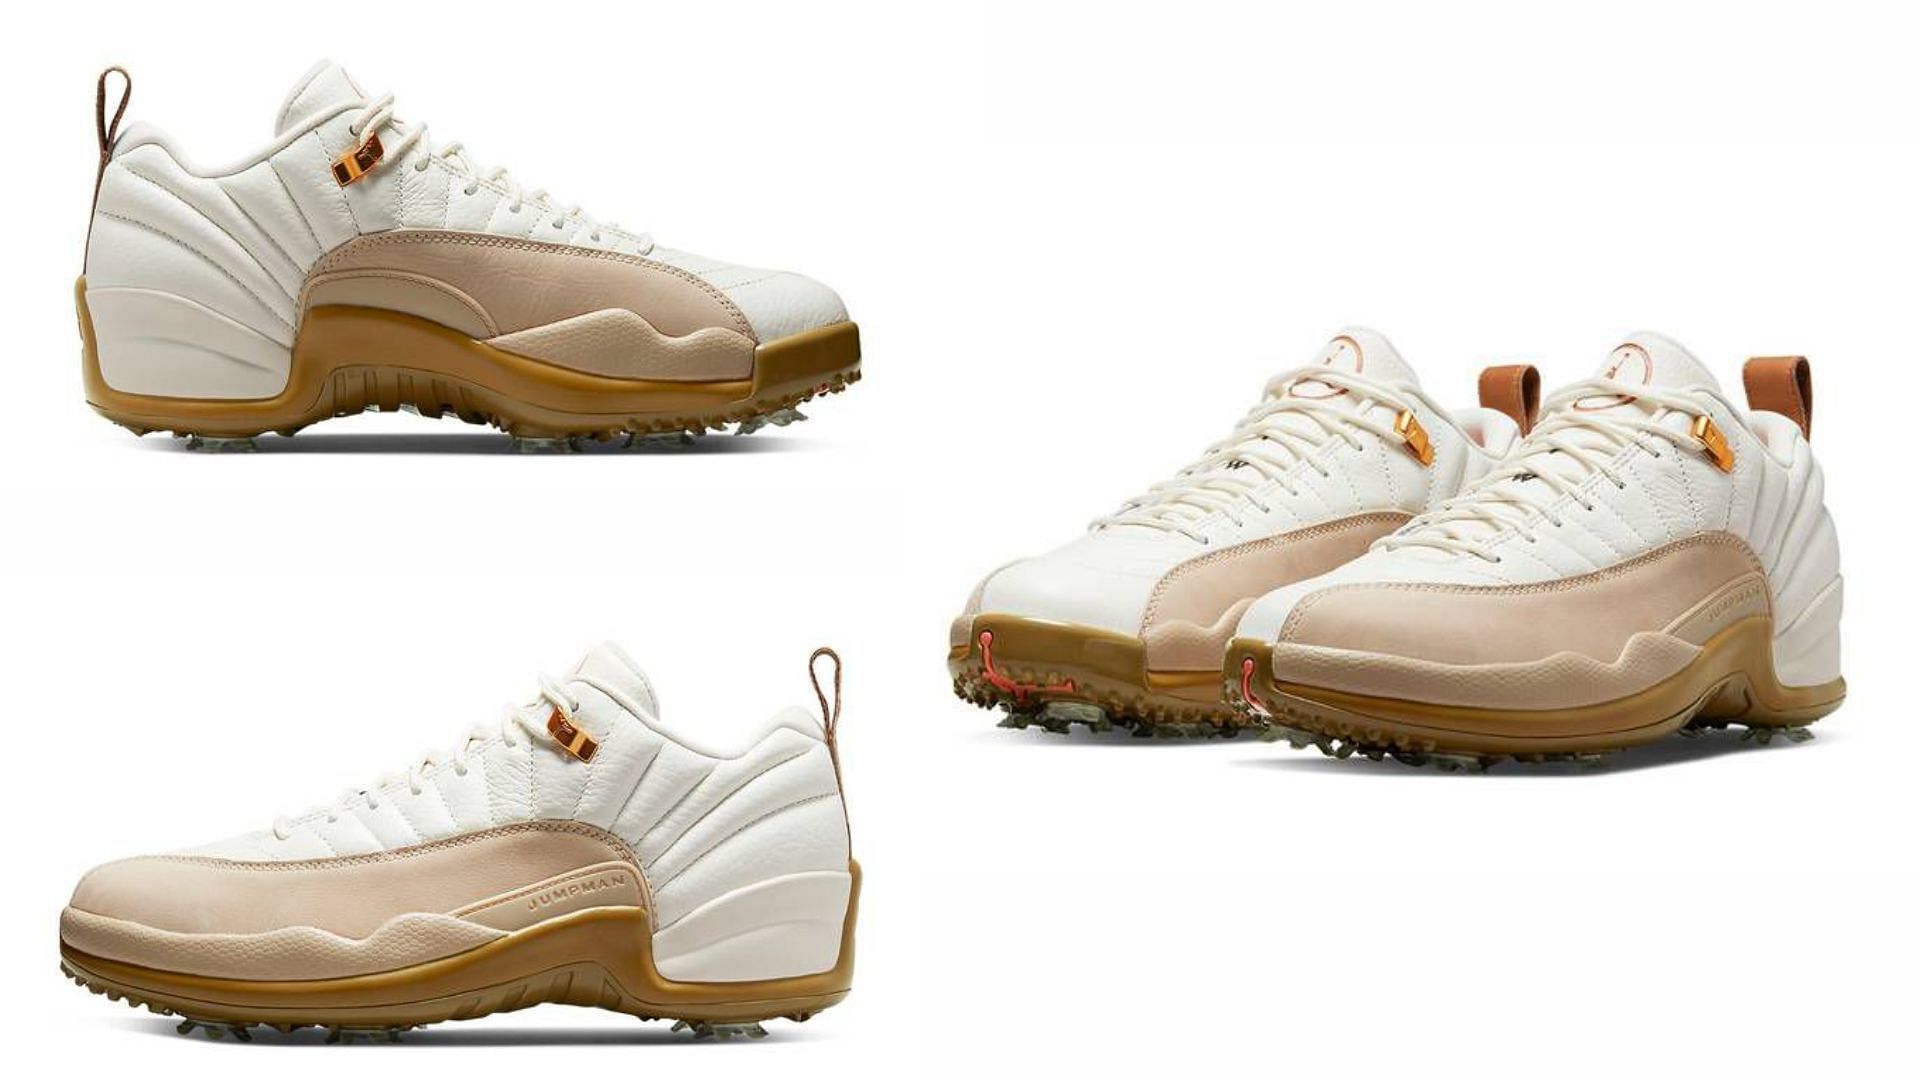 Take a closer look at the AJ12 Golf Driftwood colorway (Image via Nike)